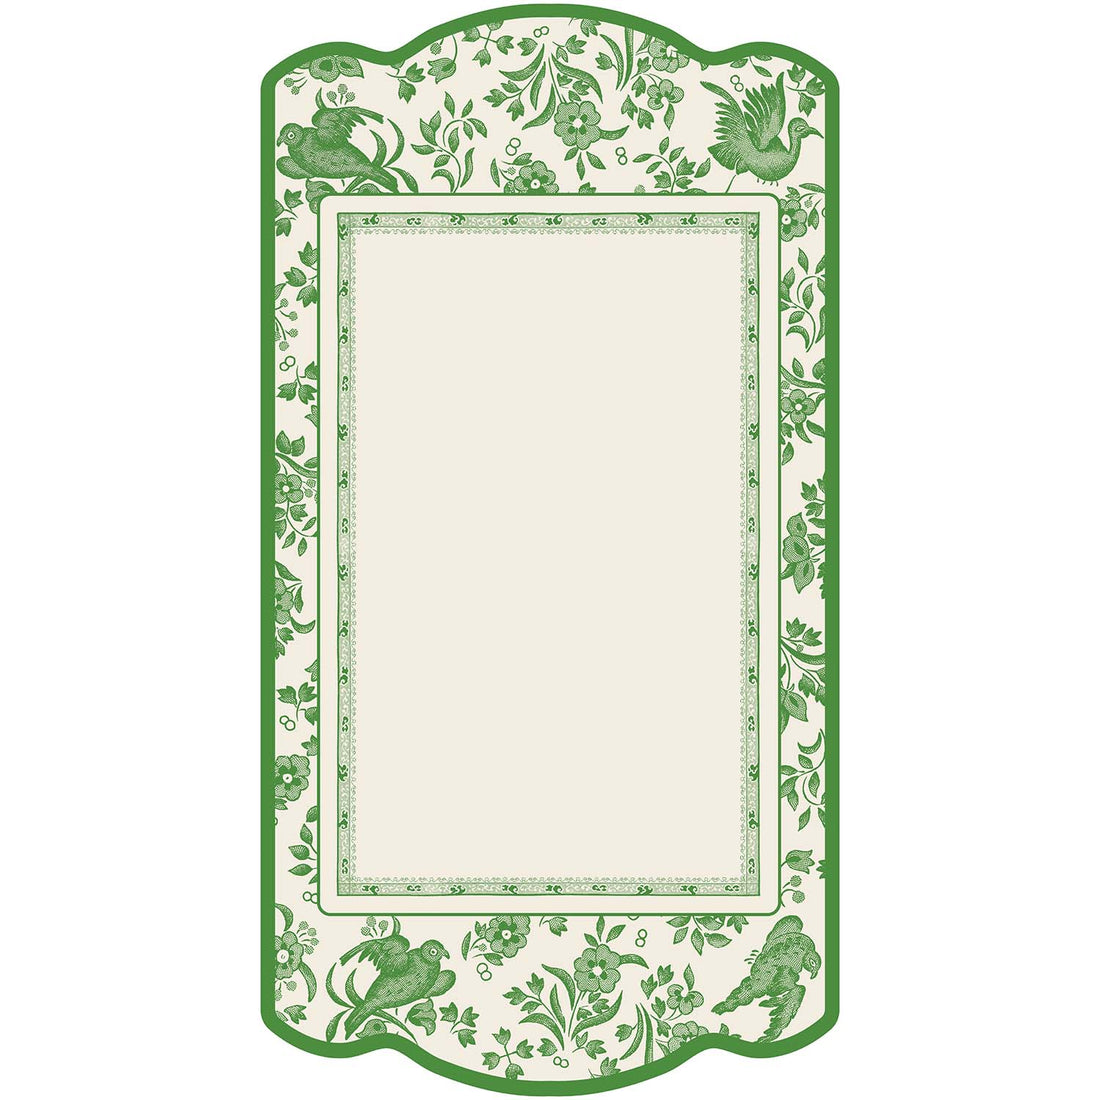 A die-cut rectangular card framed by a green vintage Burleigh-style design of birds, flowers and filagree. The center is a blank white rectangle for personalization.